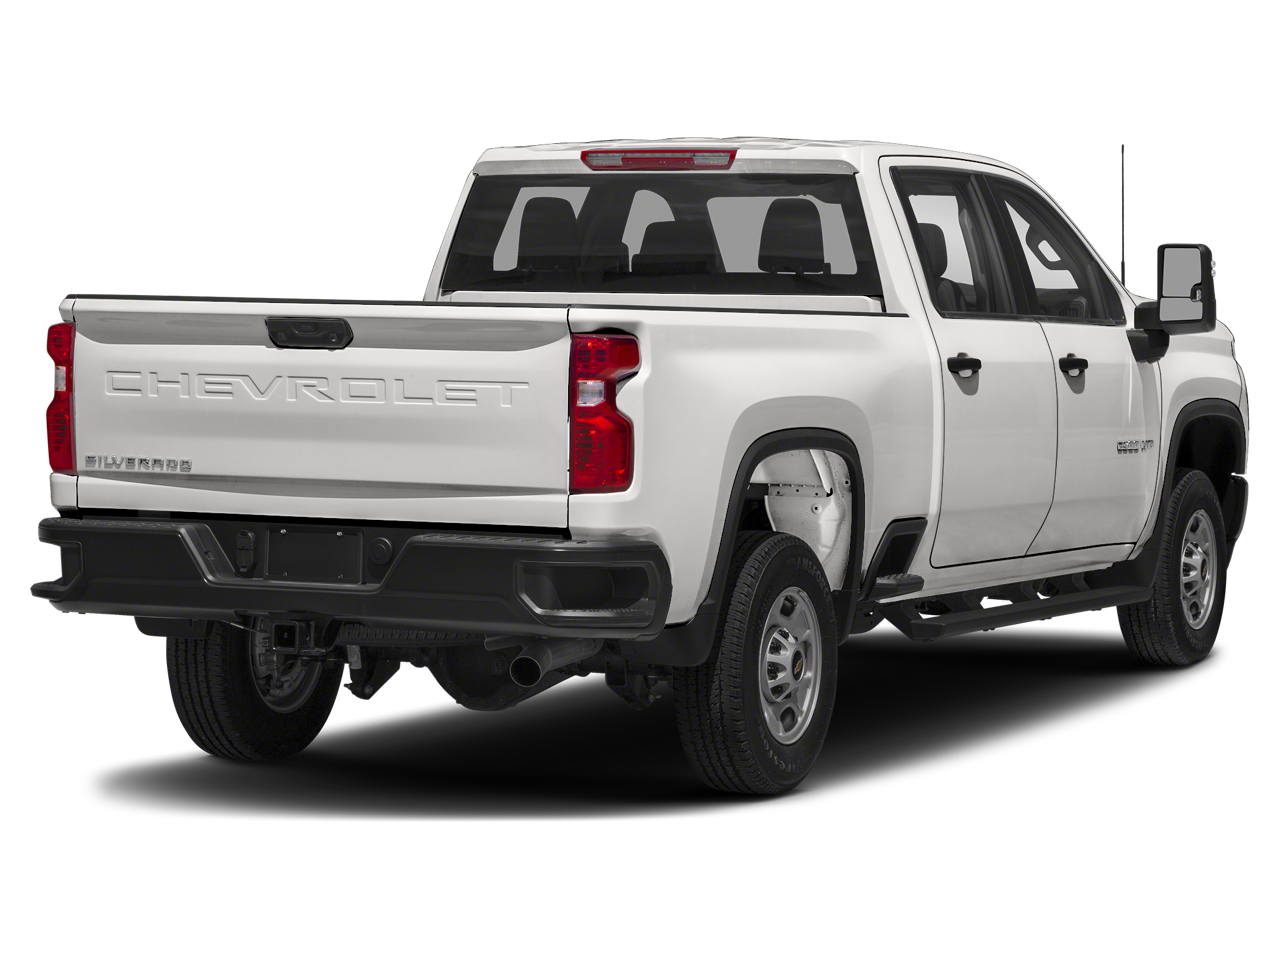 Used 2020 Chevrolet Silverado 2500HD Work Truck with VIN 1GC1YLE76LF182941 for sale in Northfield, Minnesota